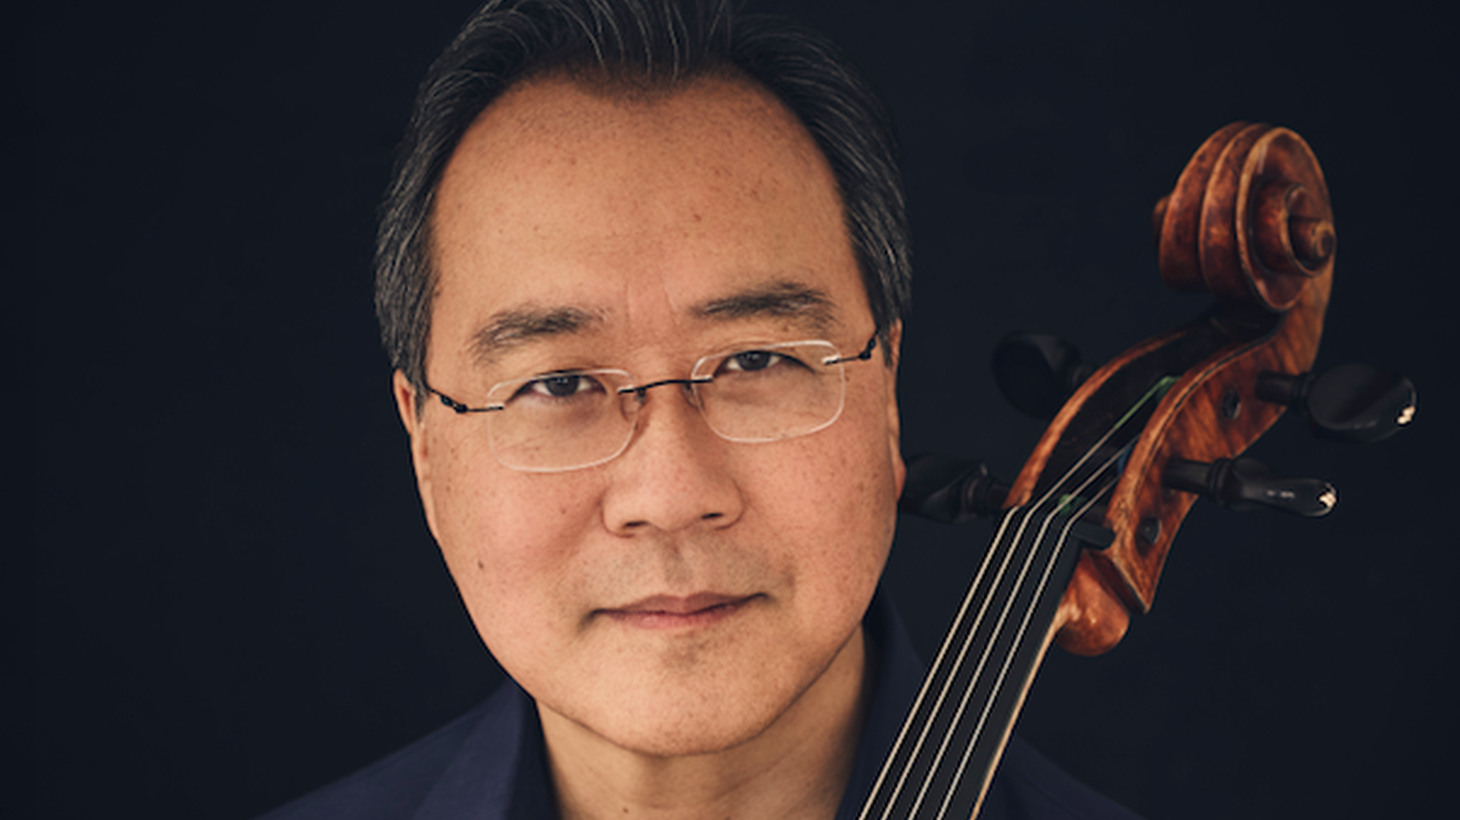 Yo-Yo Ma is widely regarded as one of the greatest cellists of all time and joins us for a solo live performance at 10am to play the music of Bach.